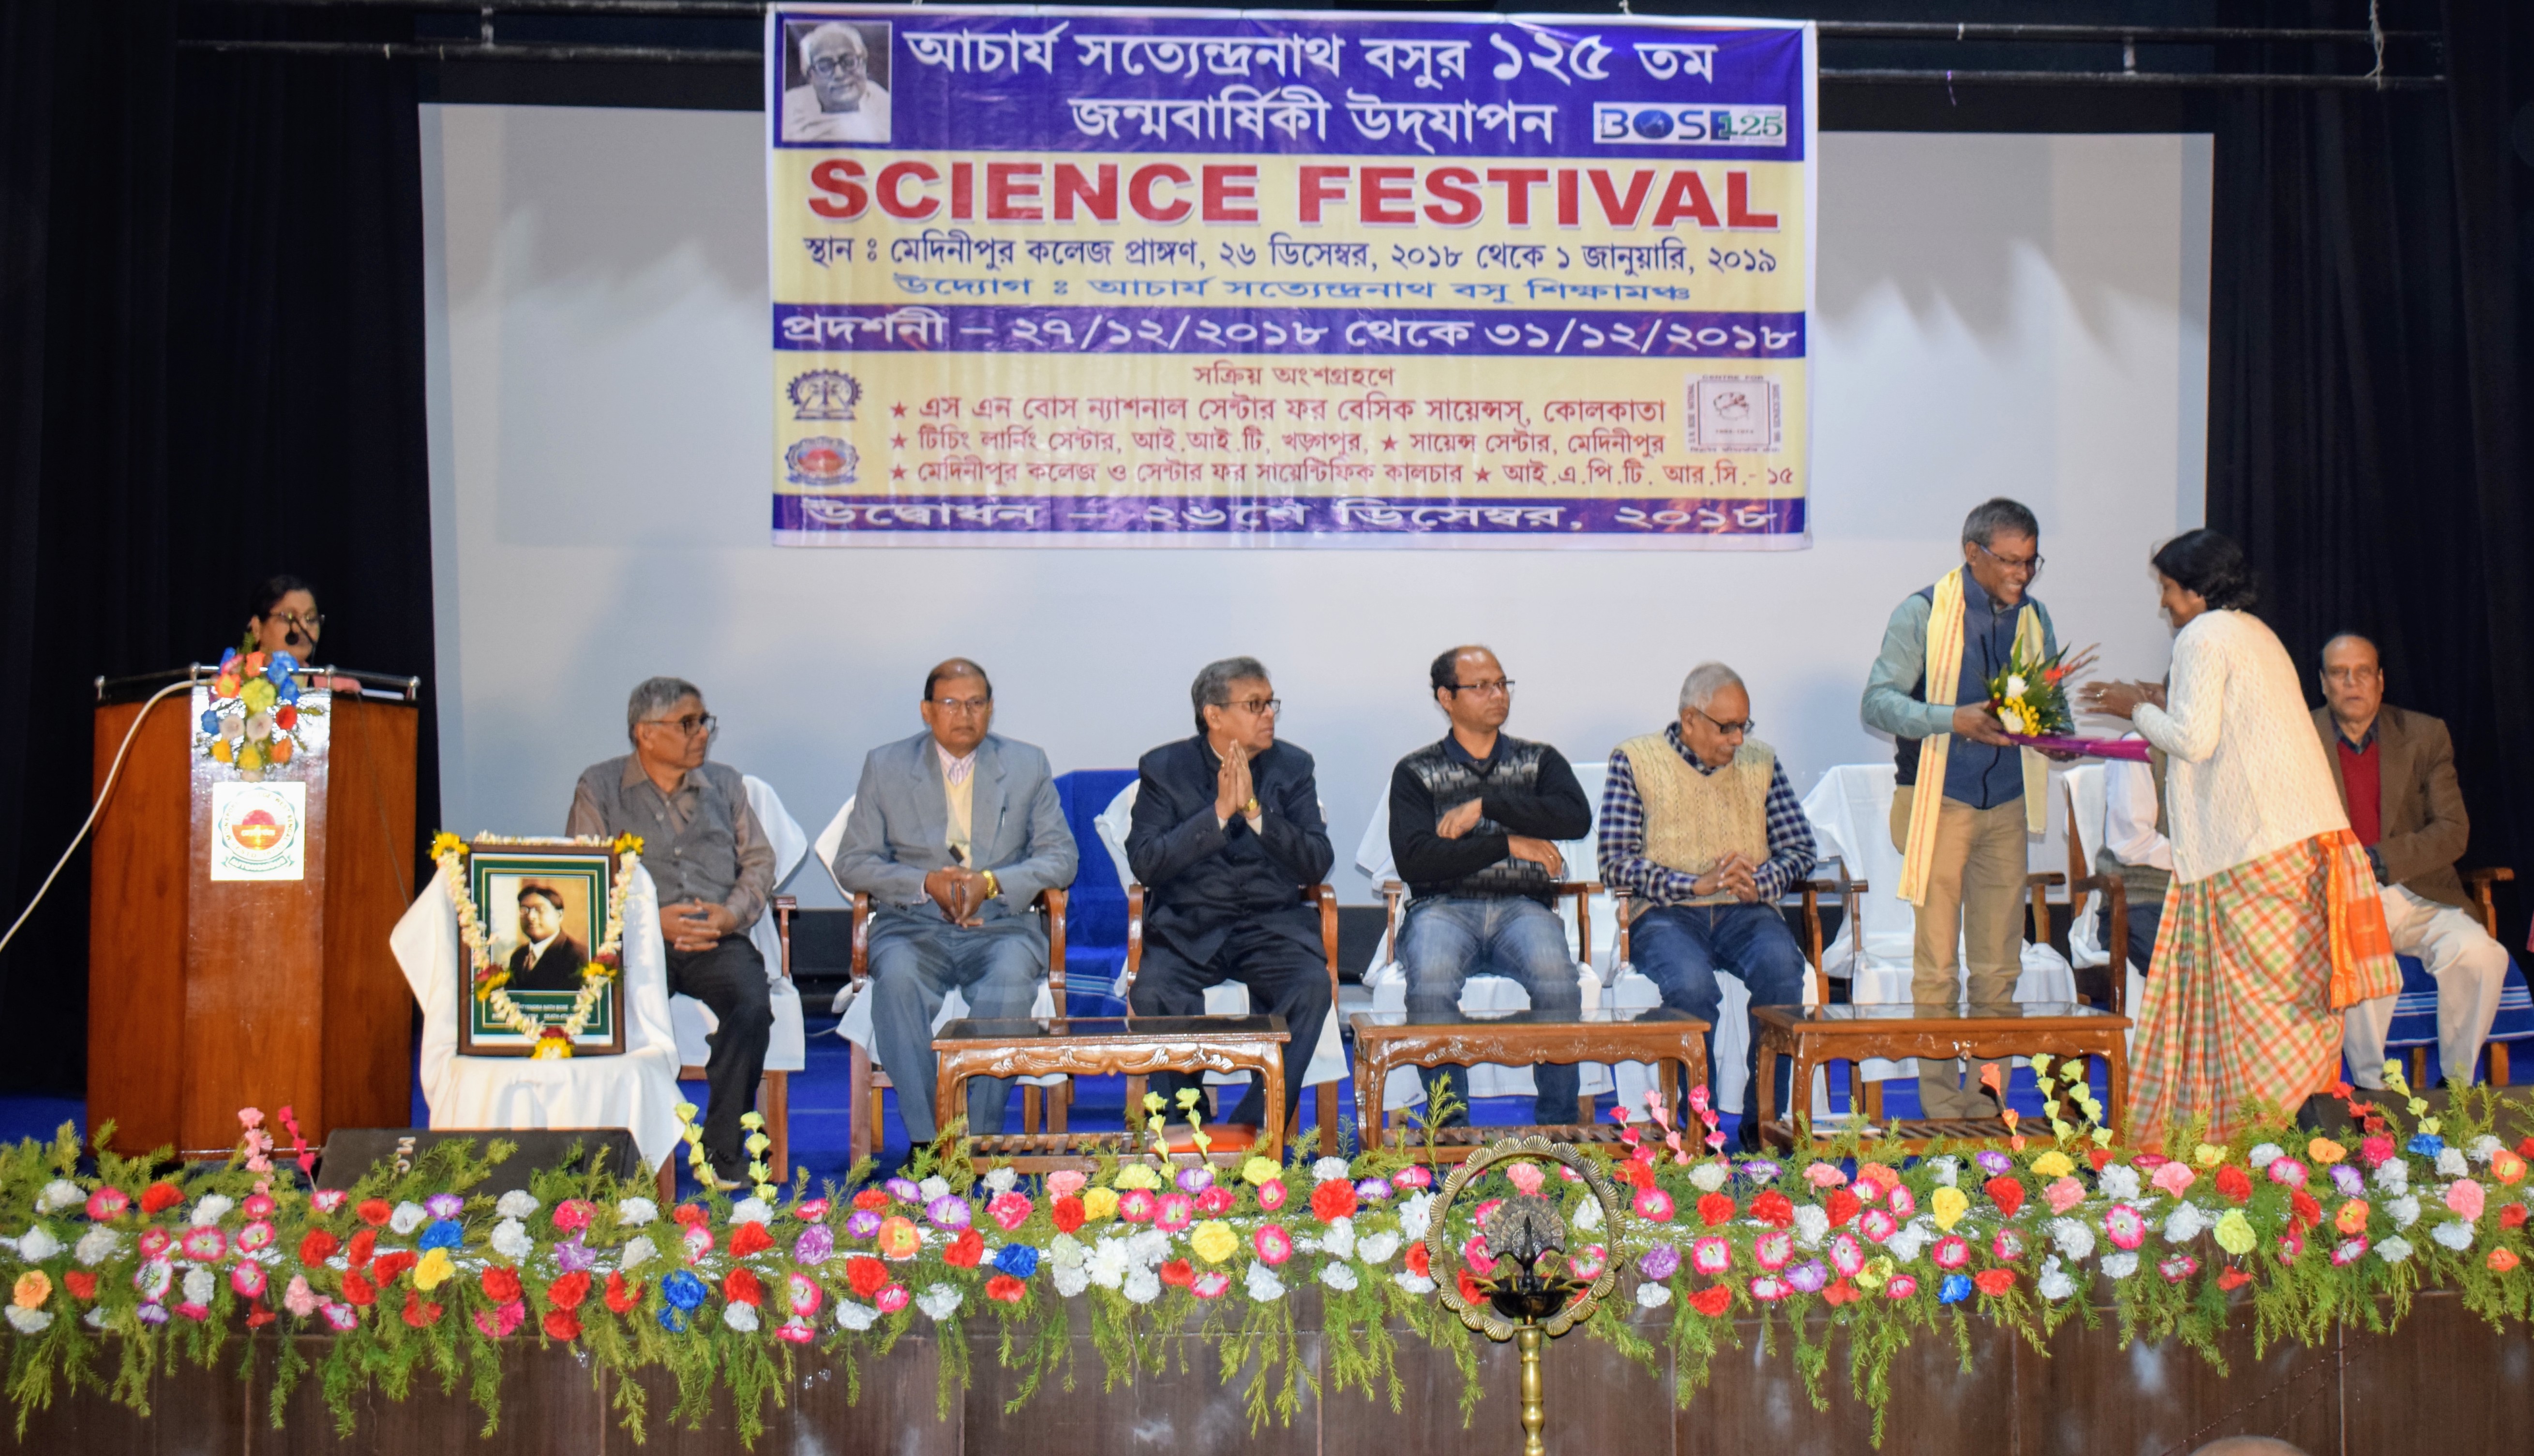 BOSE - 125 : OUTREACH PROGRAMME :Seven-days celebration programme on the occasion of 125th Birth Anniversary of Prof. S.N. Bose